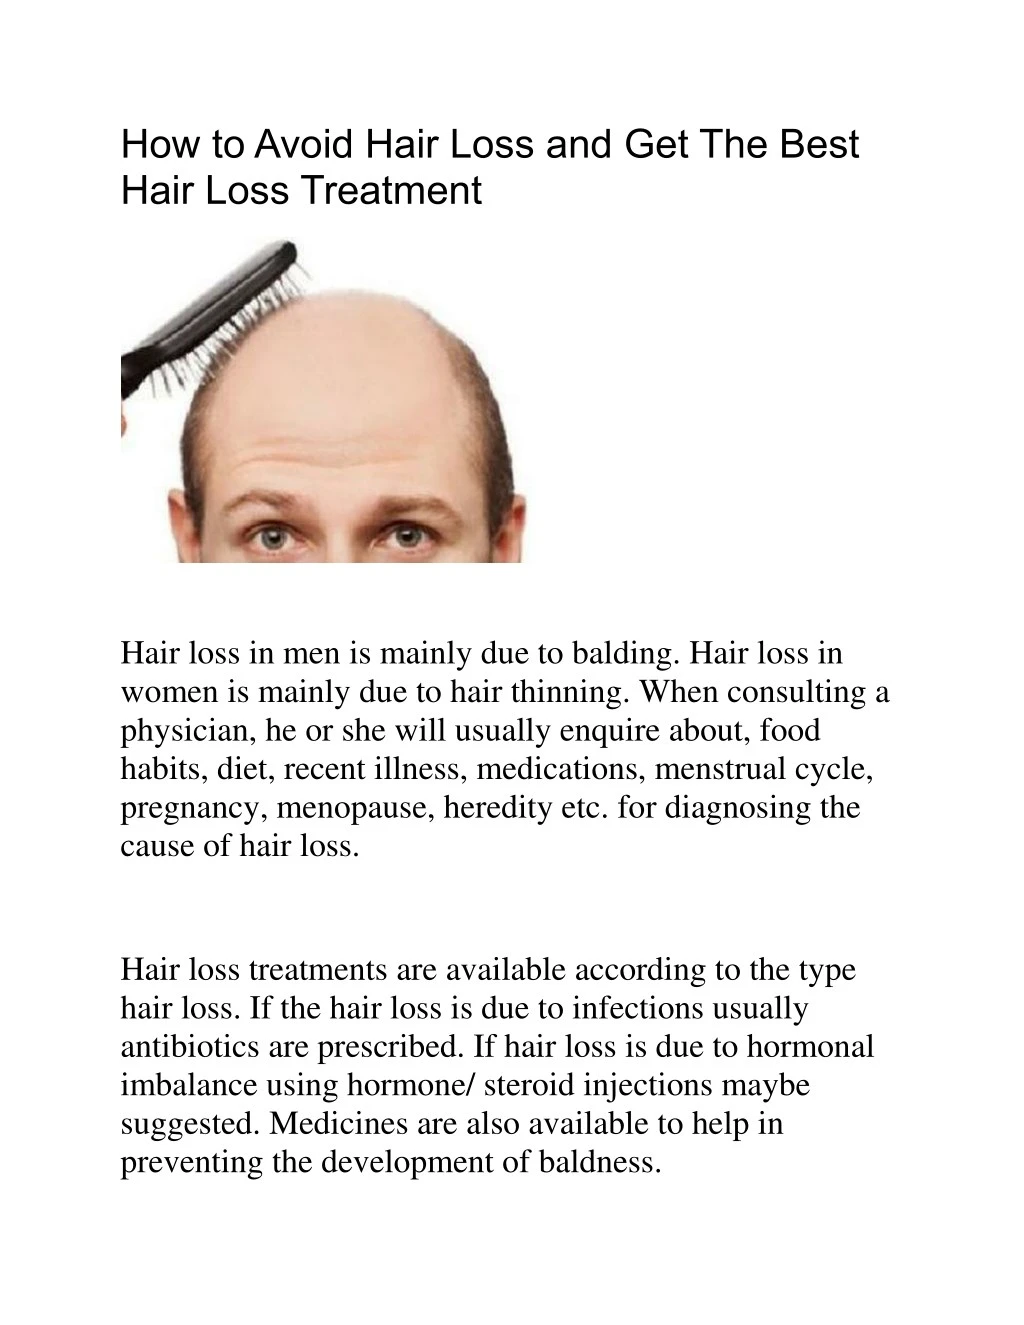 how to avoid hair loss and get the best hair loss